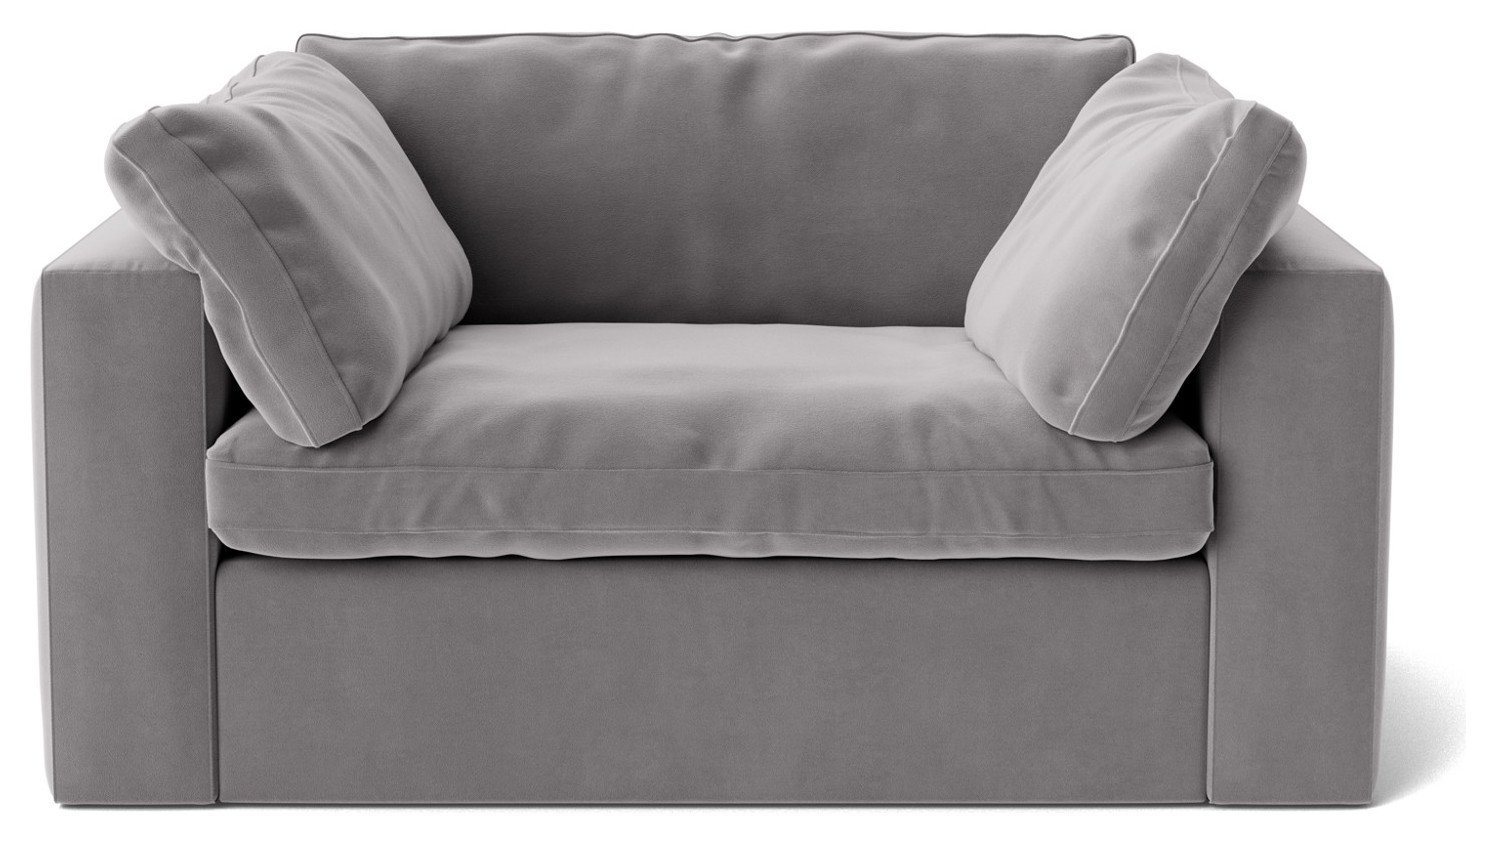 Swoon Seattle Velvet Cuddle Chair - Silver Grey